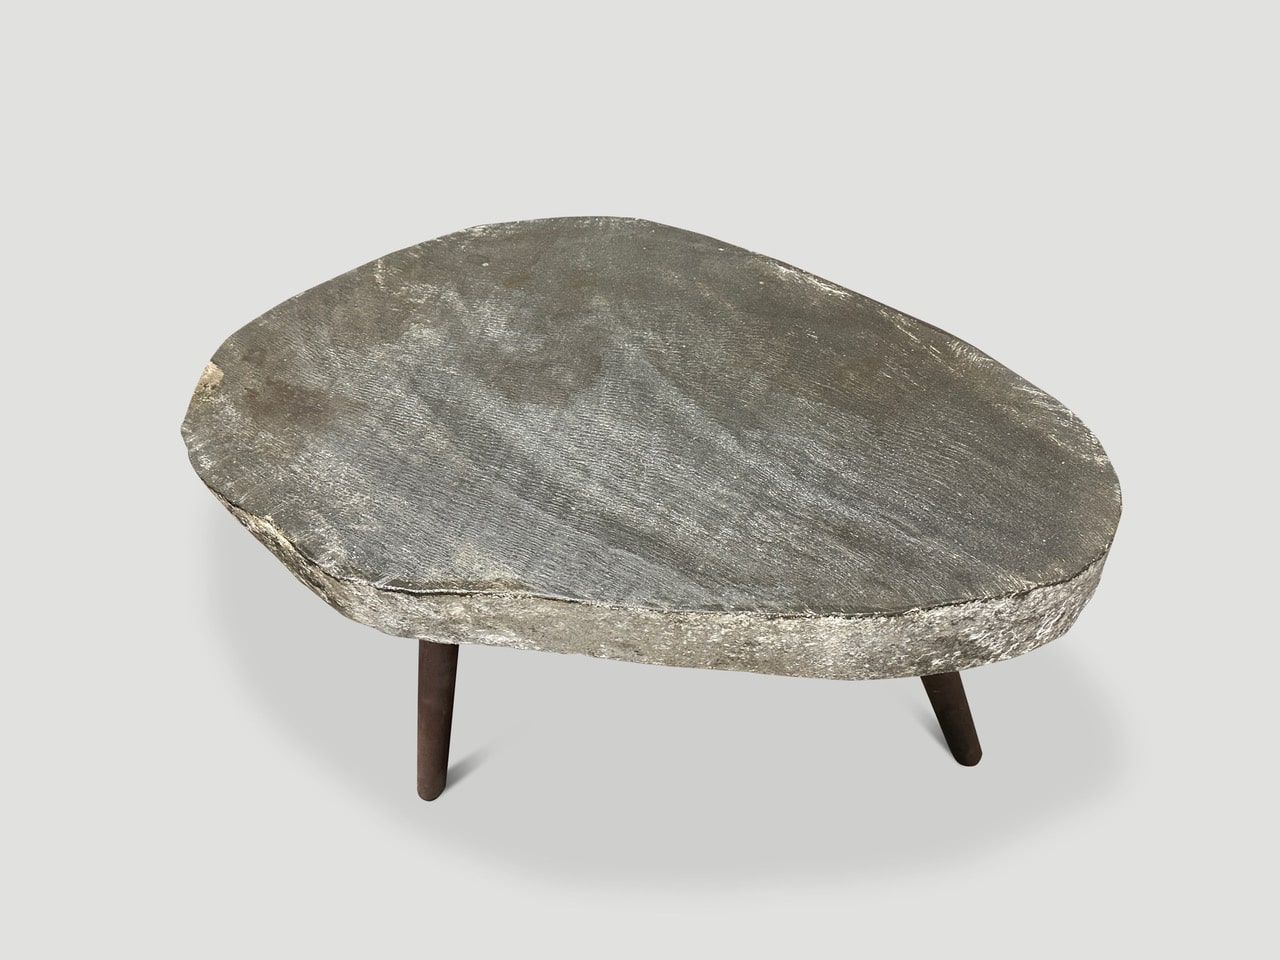 River stone side table